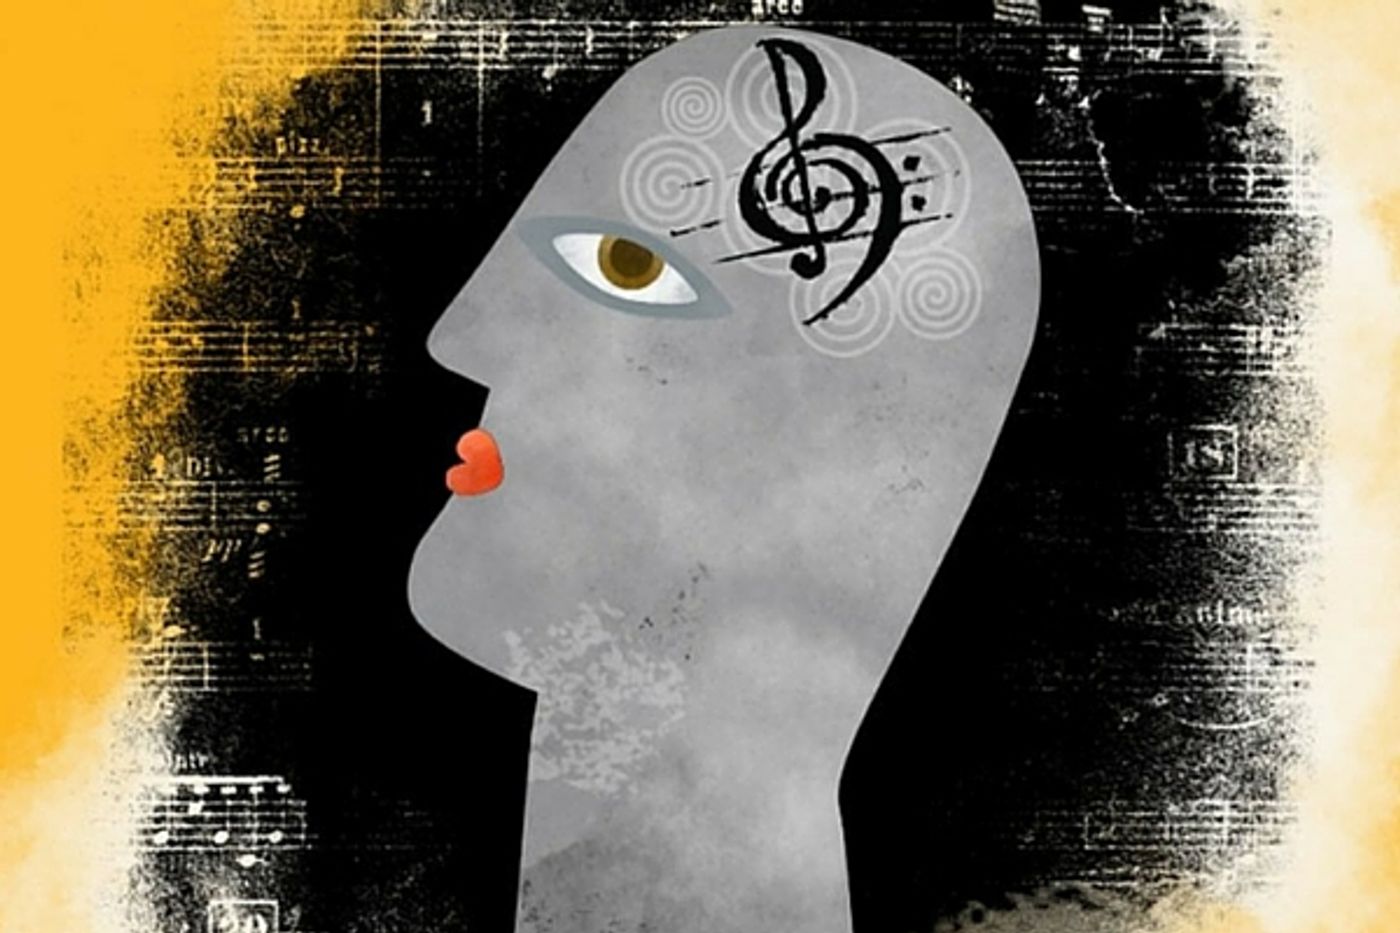 Do we like music based on our brain or our experience?